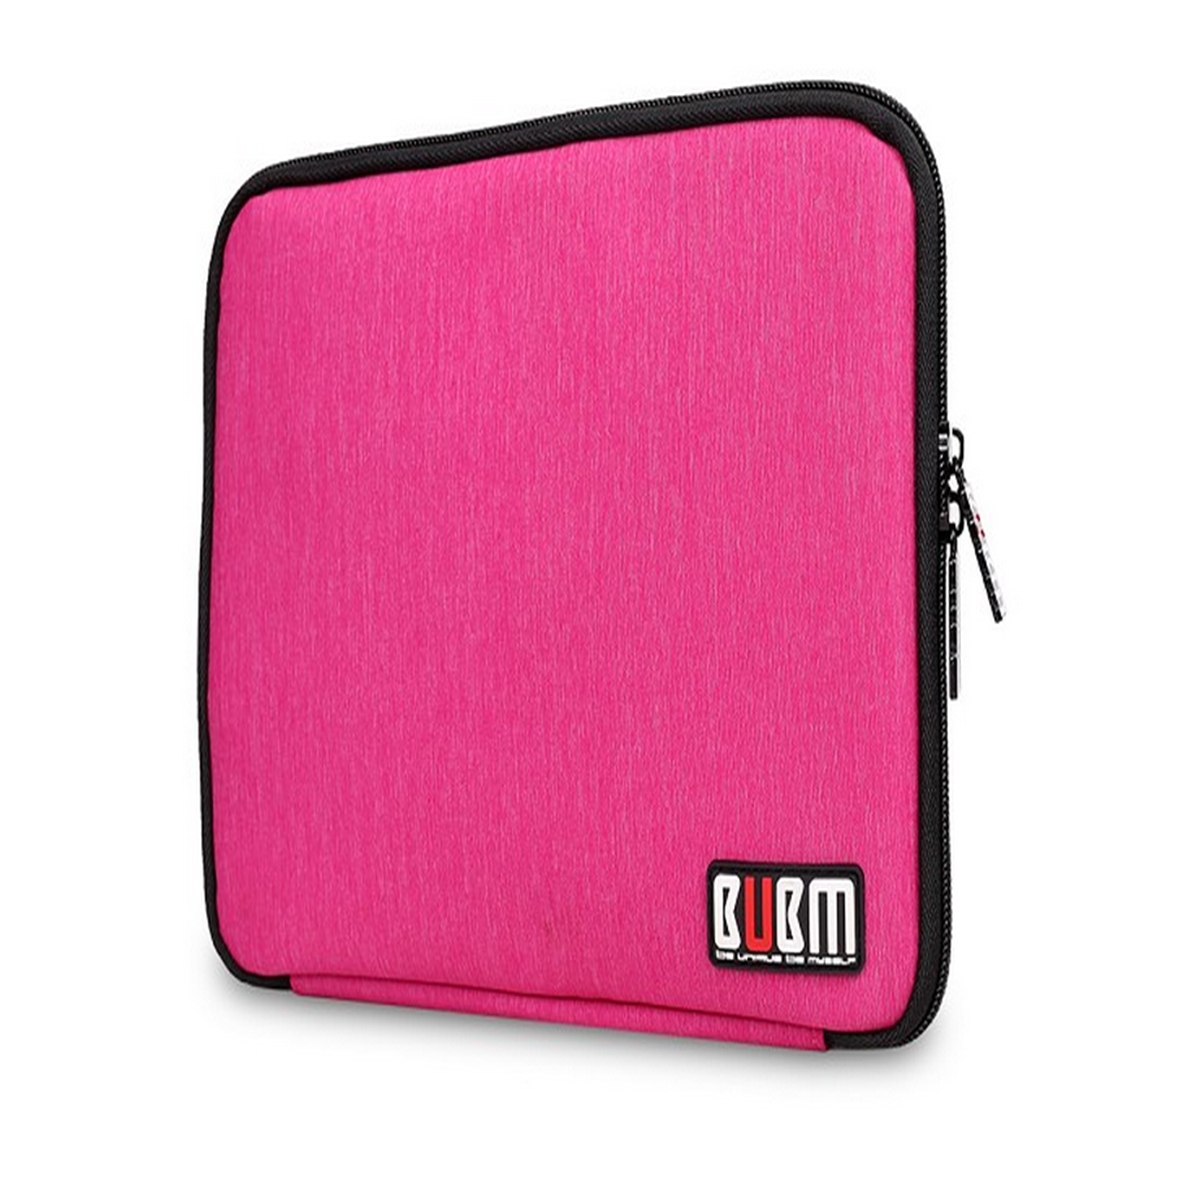 Find BUBM oversized Capacity Watch Tablet Earphone U Disk Cable Digital Devices Cable Organizer Case Storage Bag for Sale on Gipsybee.com with cryptocurrencies